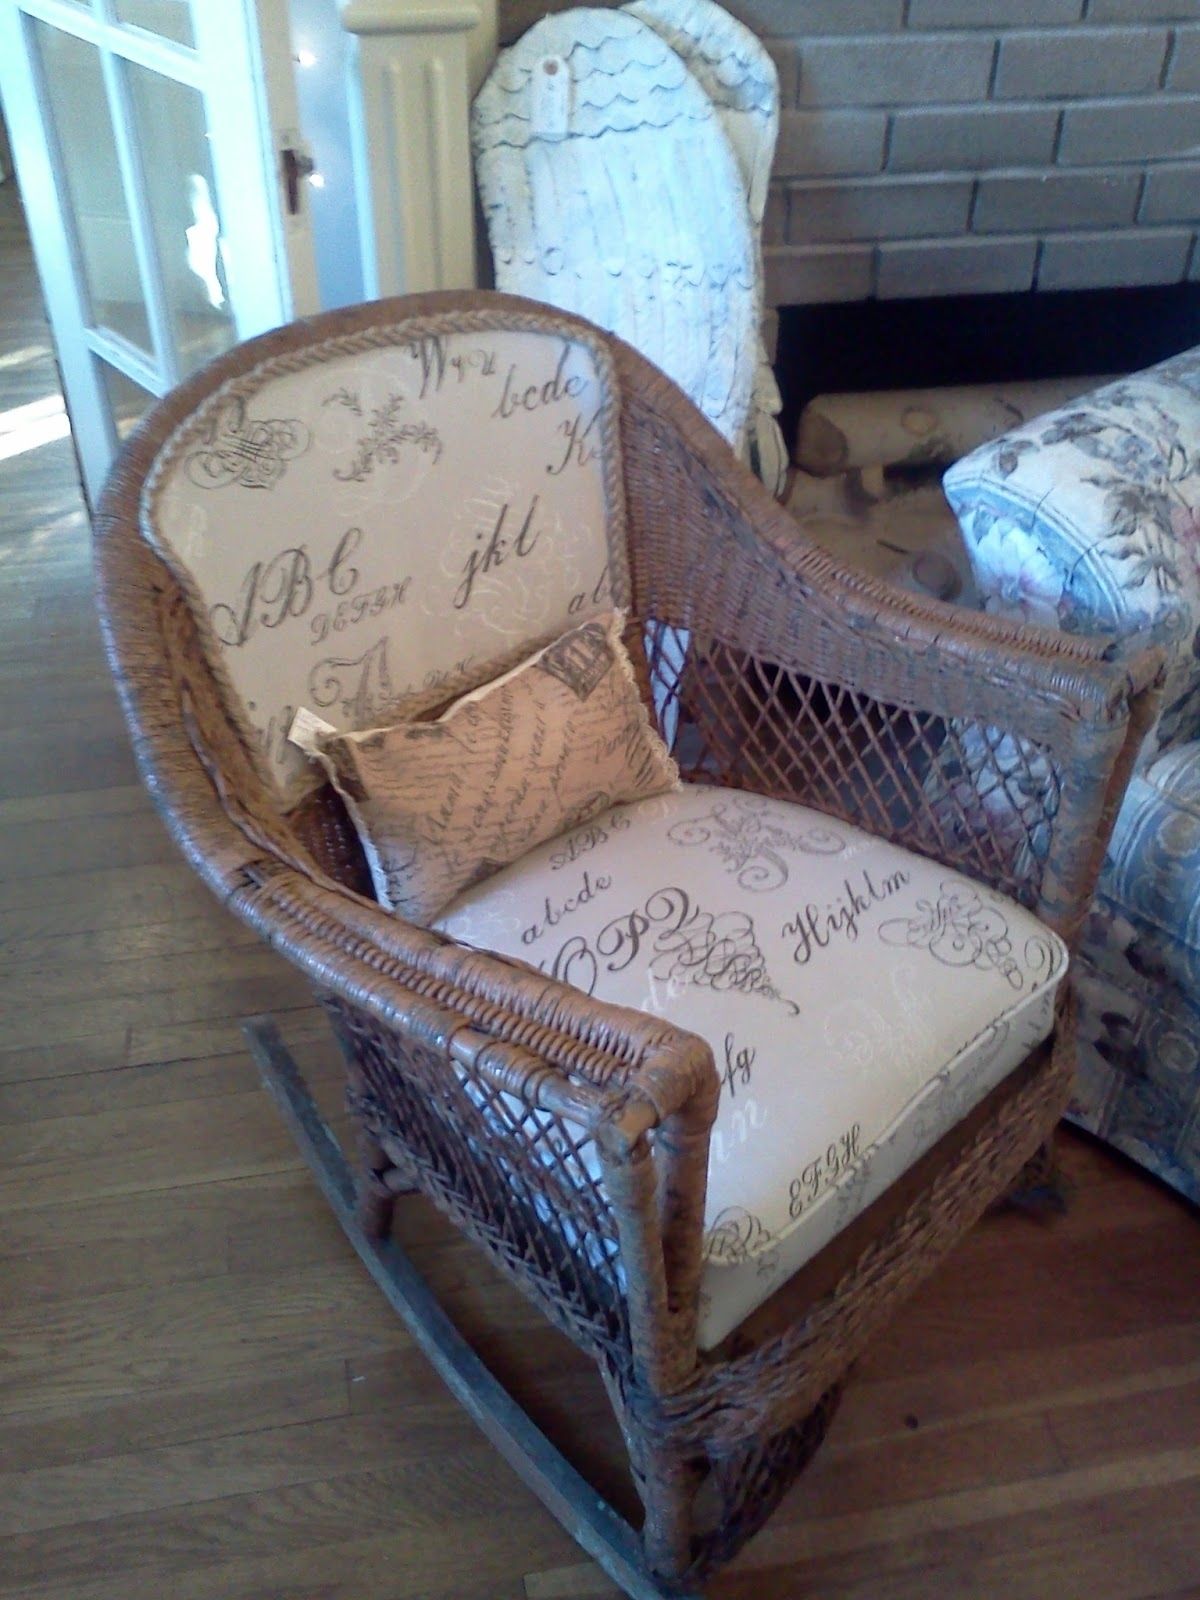 Antique Wicker Rocking Chair With Springs | Best Home Chair Decoration Inside Antique Wicker Rocking Chairs With Springs (View 9 of 15)